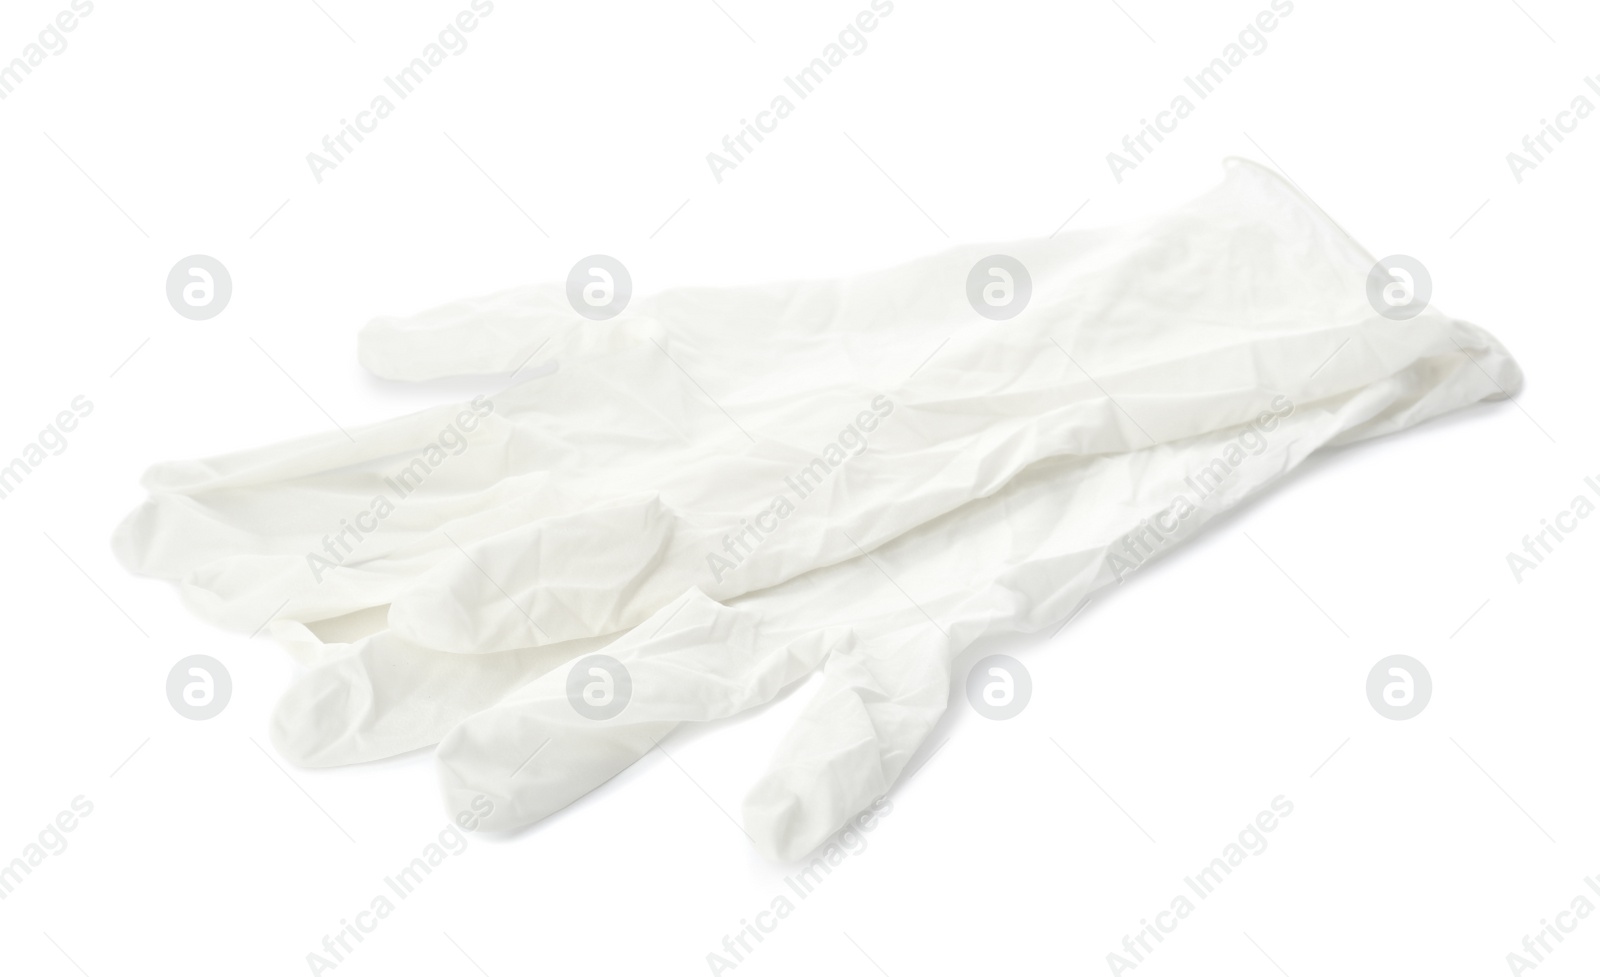 Photo of Protective gloves on white background. Medical item